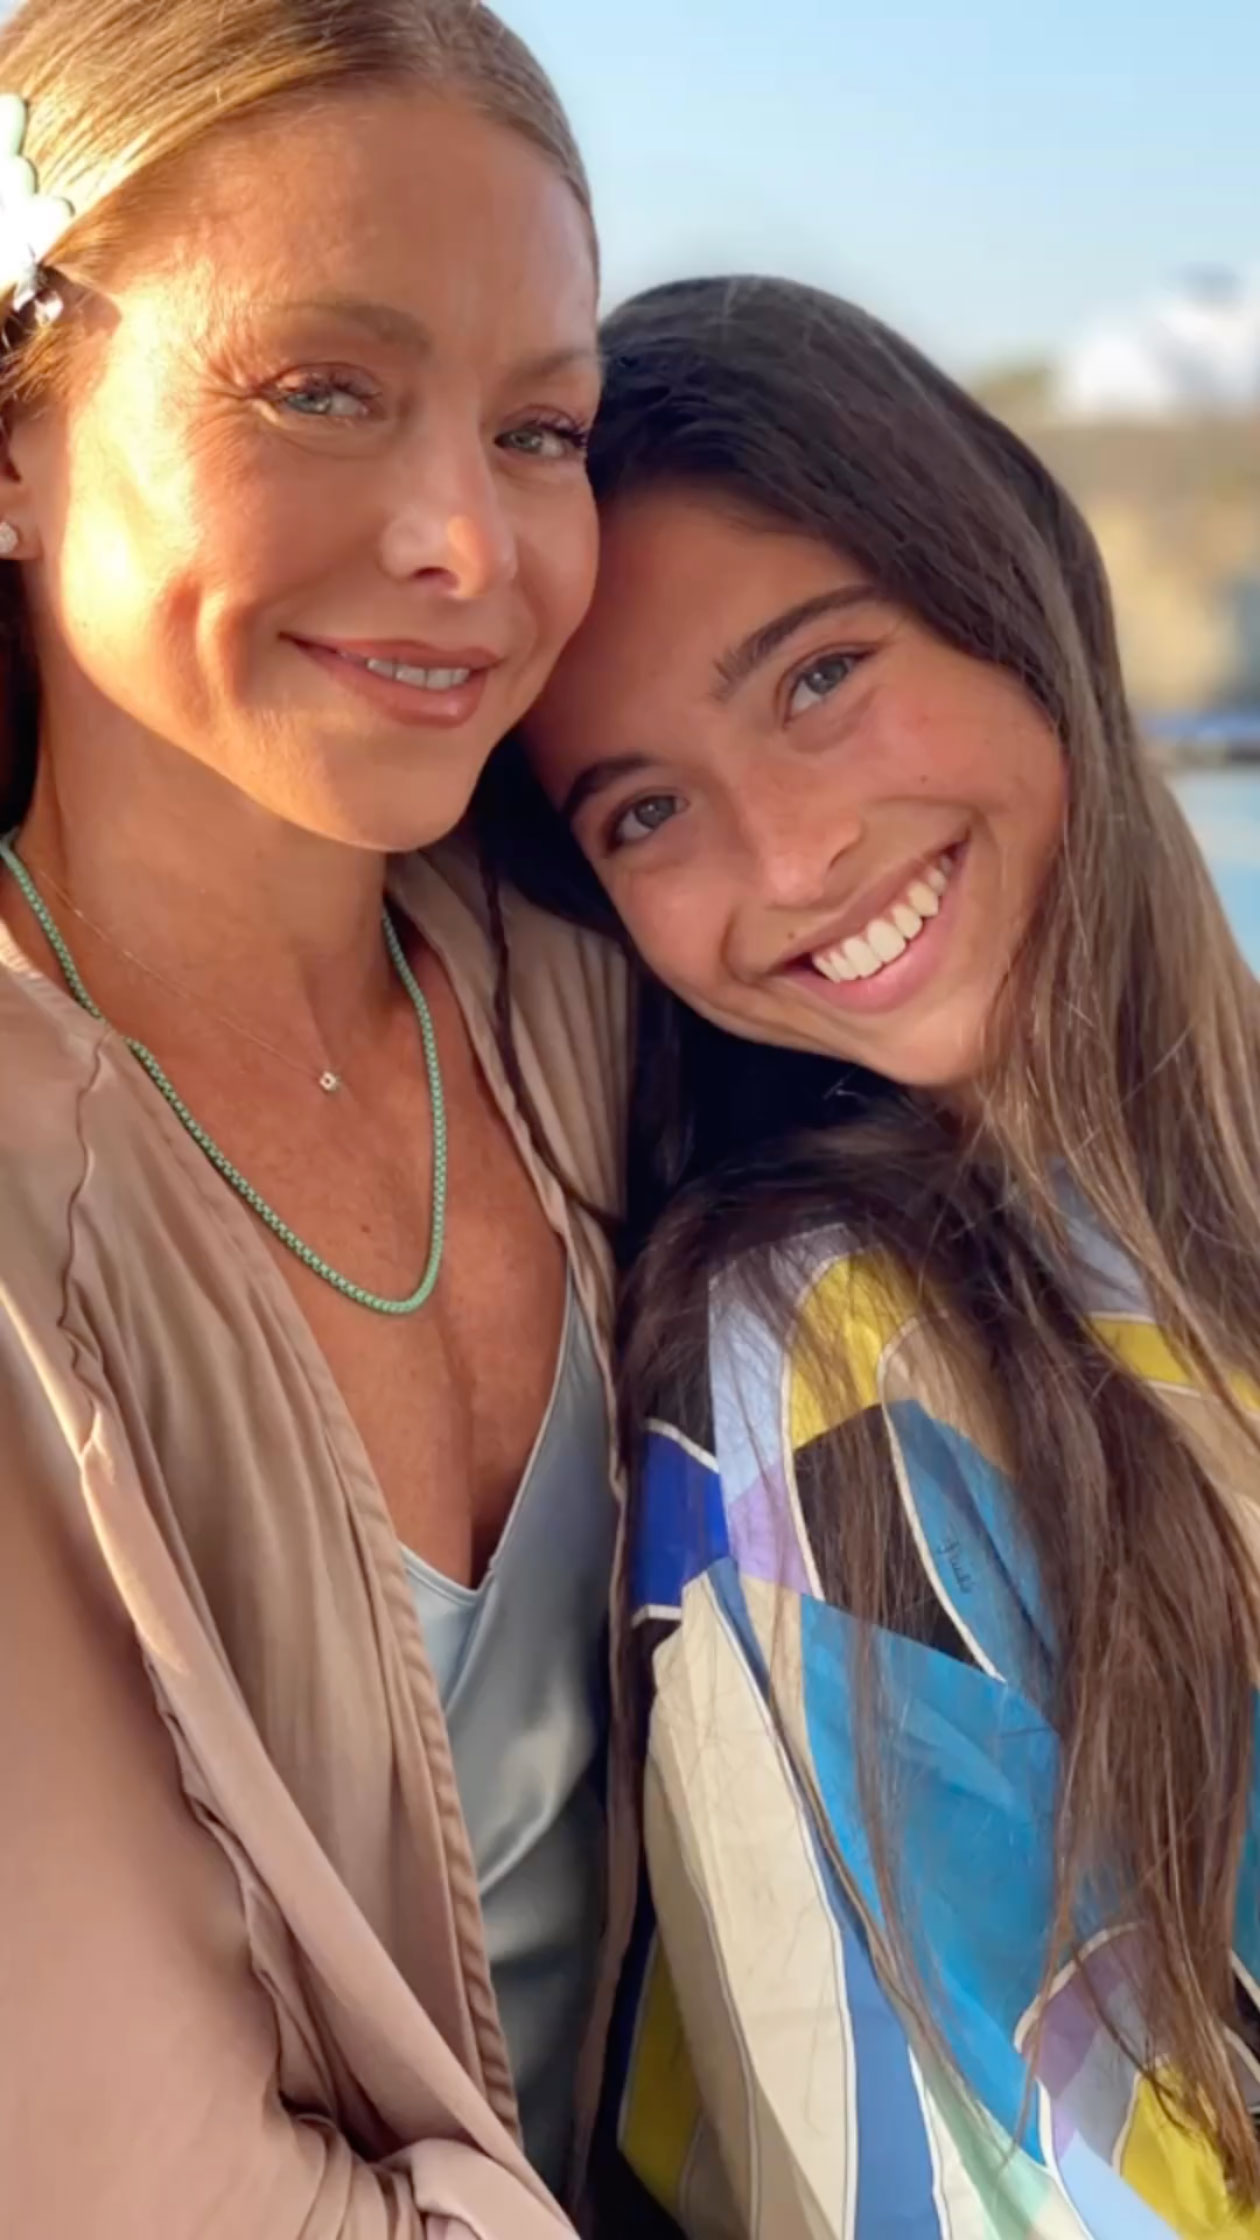 Kelly and Lola posed together on their vacation in Greece